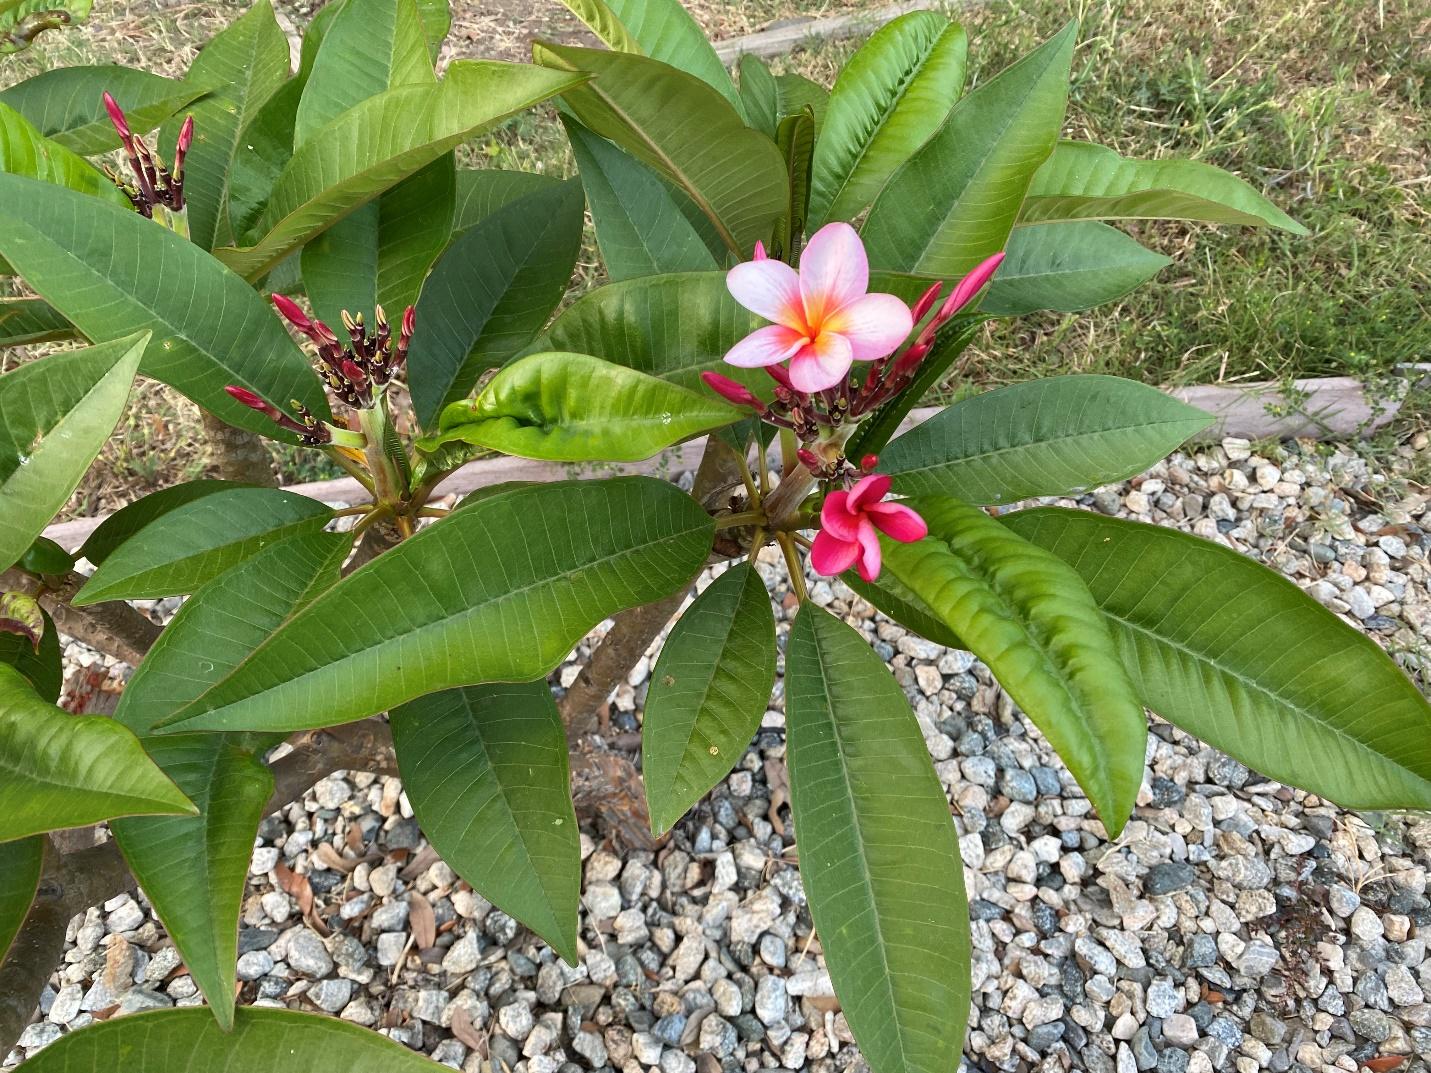 A plant with pink flowers and green leaves

Description automatically generated